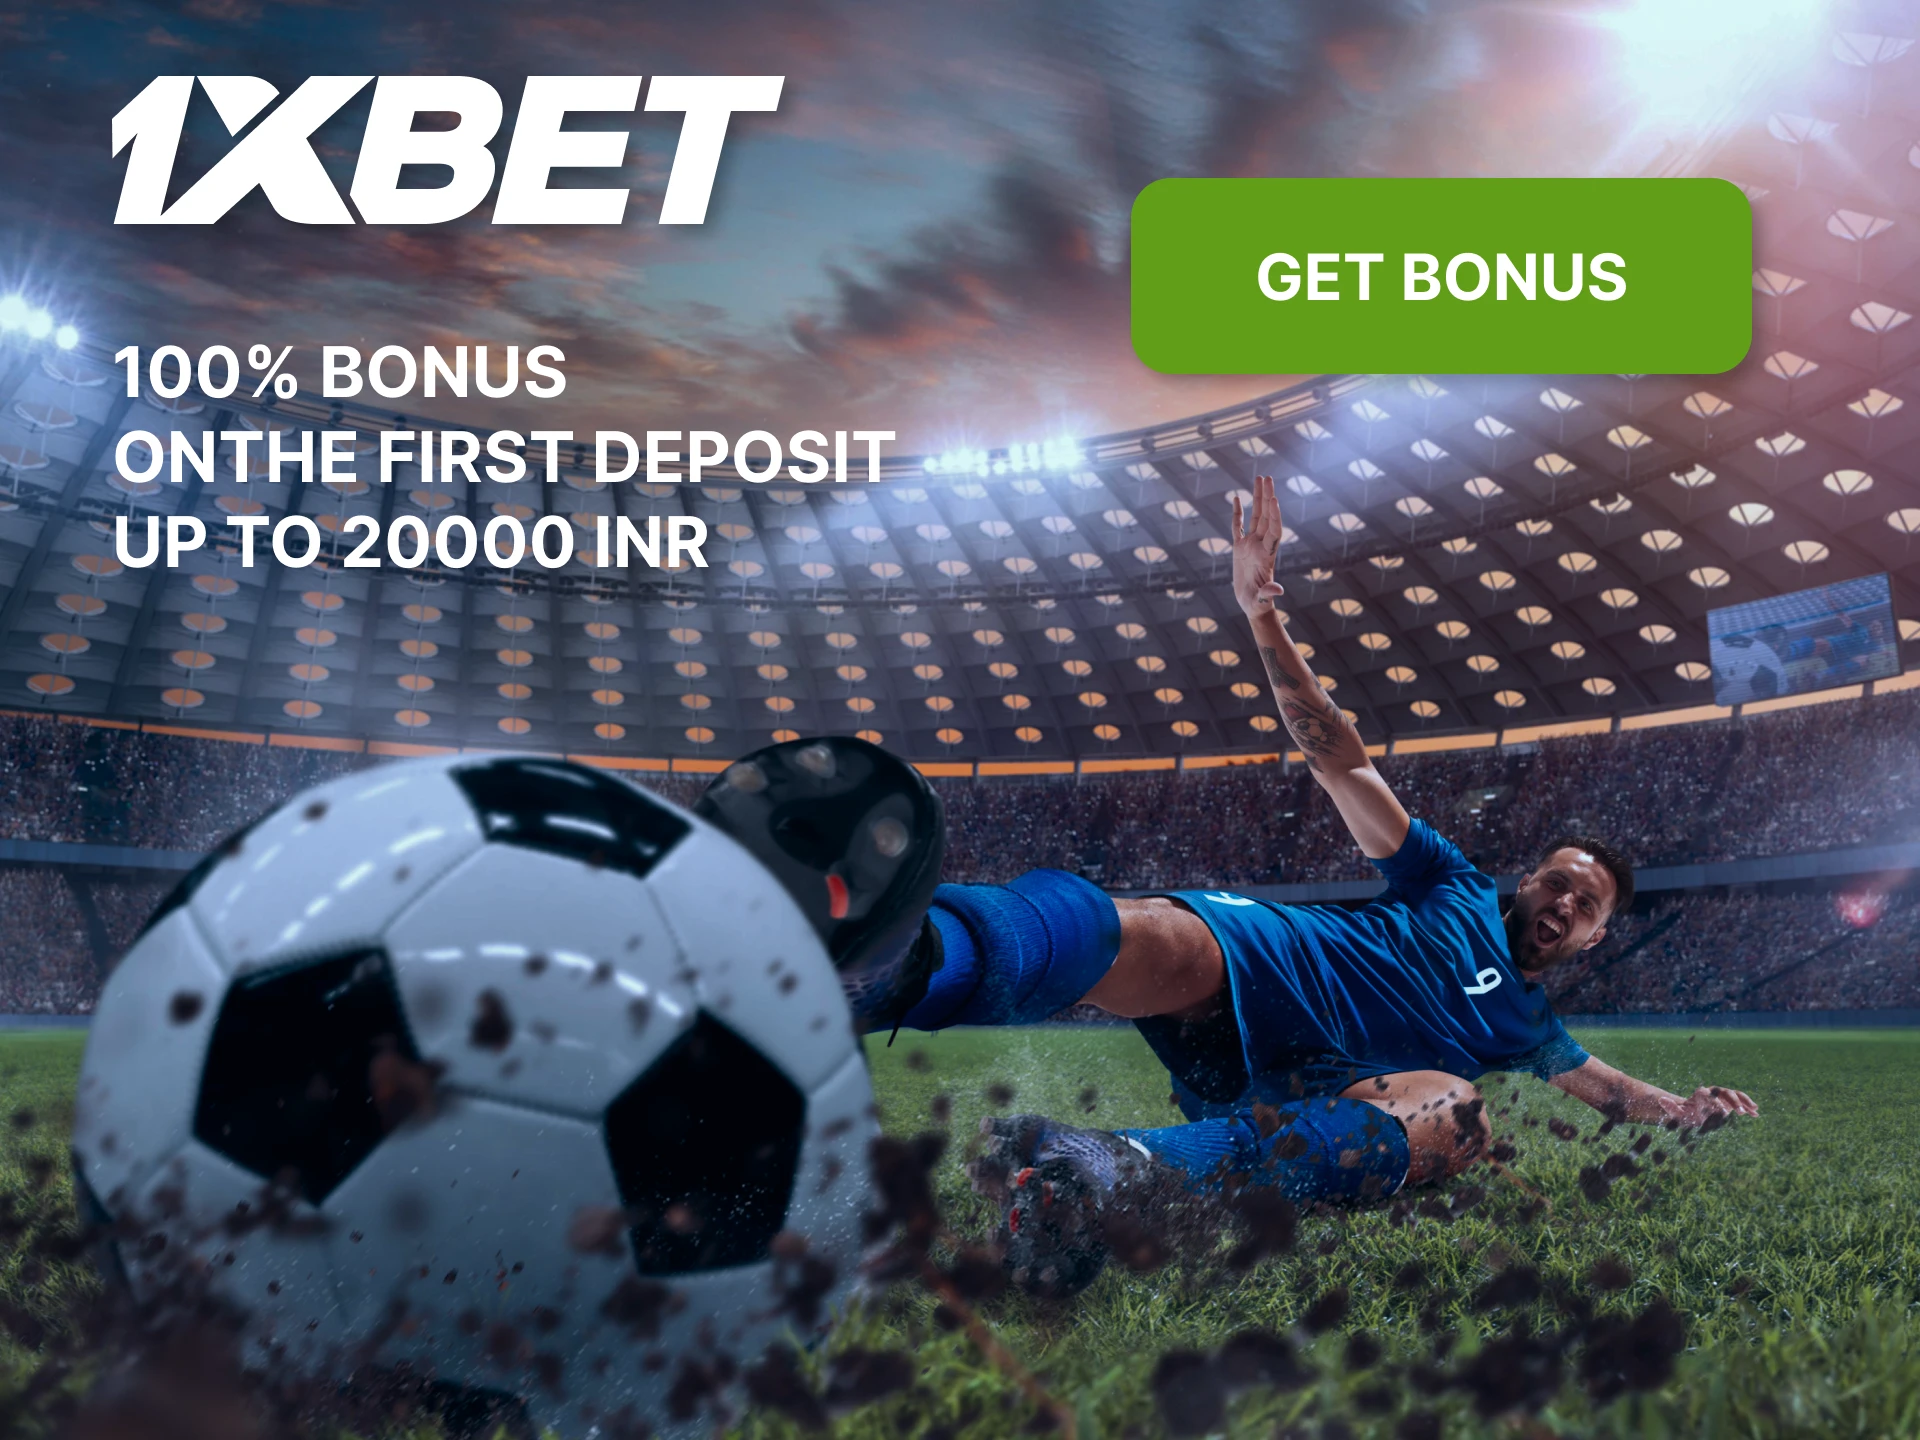 Be sure to get your profitable bonus after registering and making your first deposit at 1xBet.